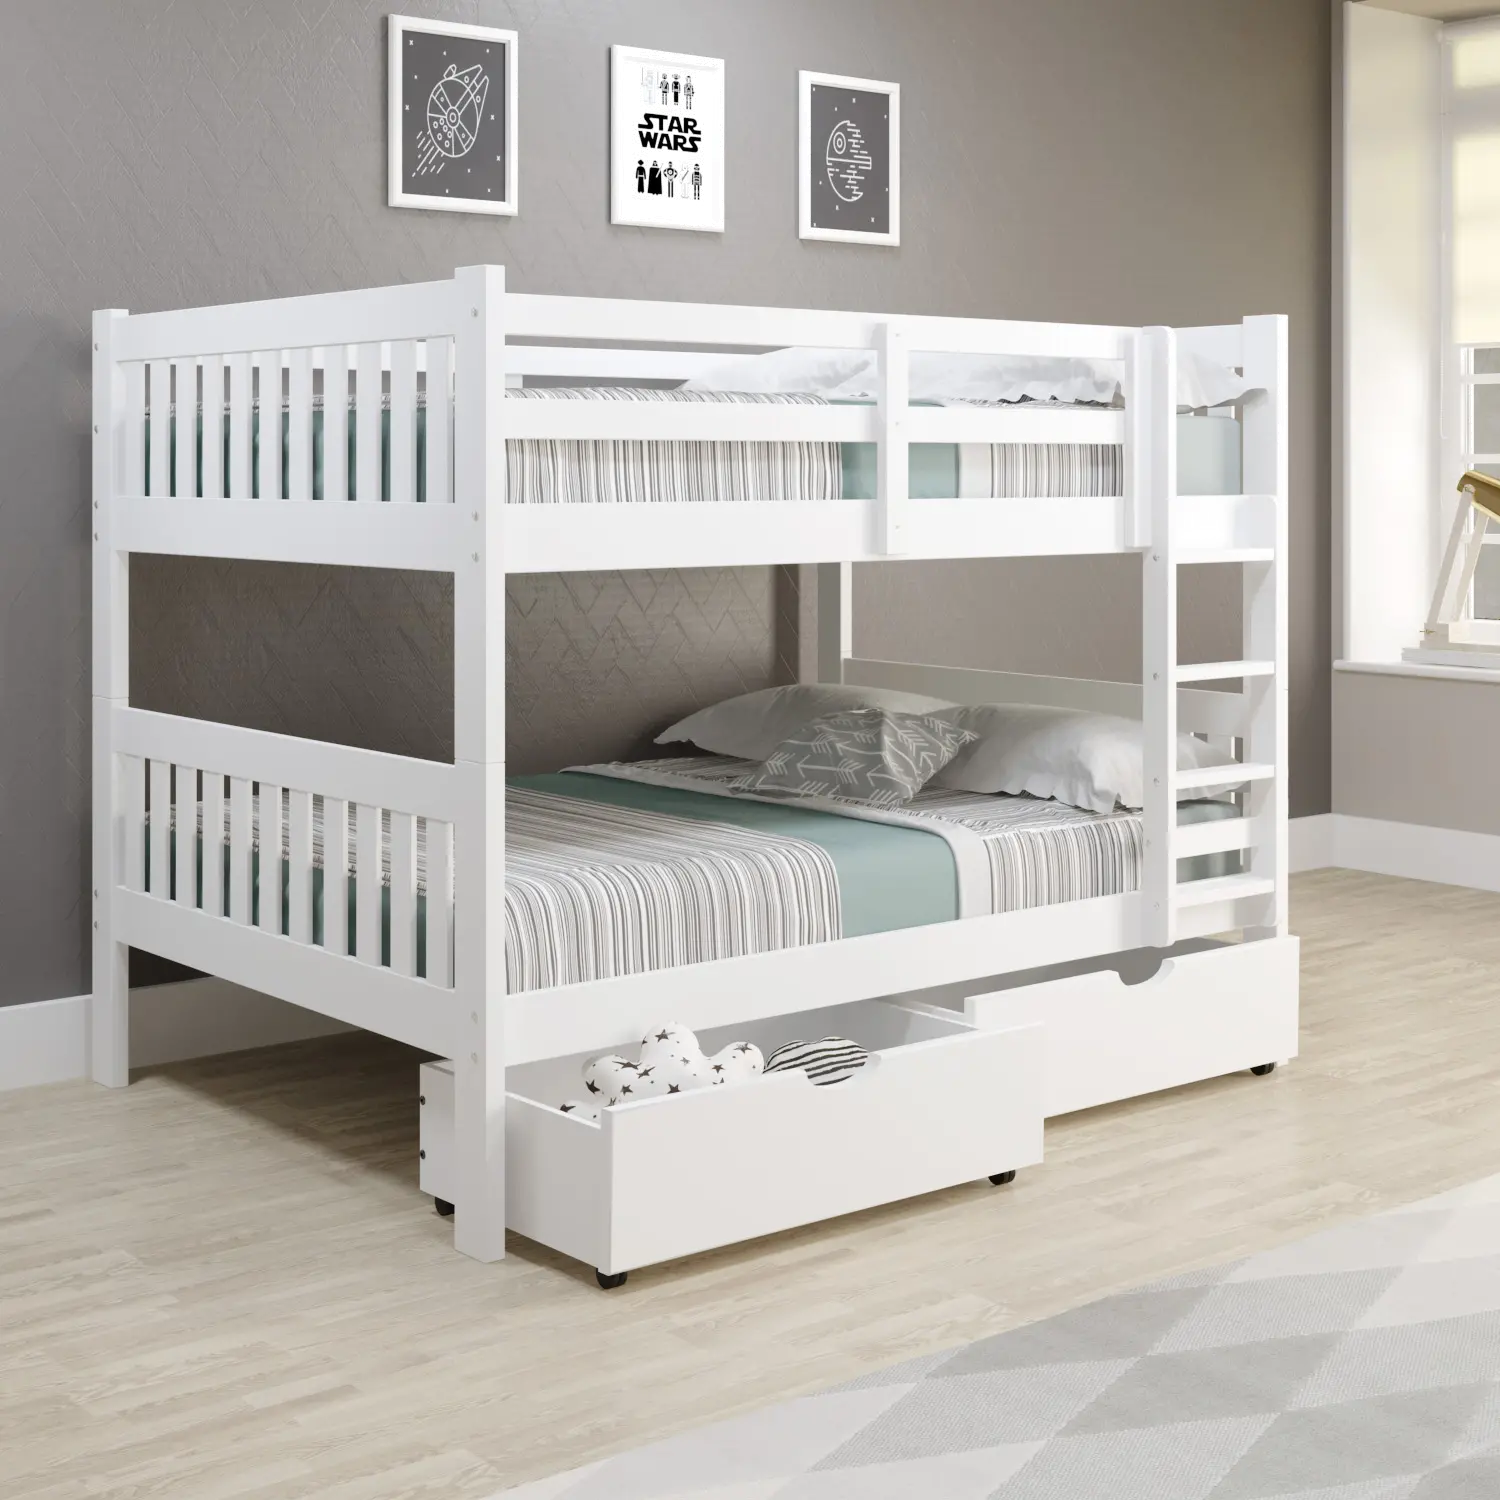 1015-3FFW505-W Mission White Full-over-Full Bunk Bed with Drawers sku 1015-3FFW505-W